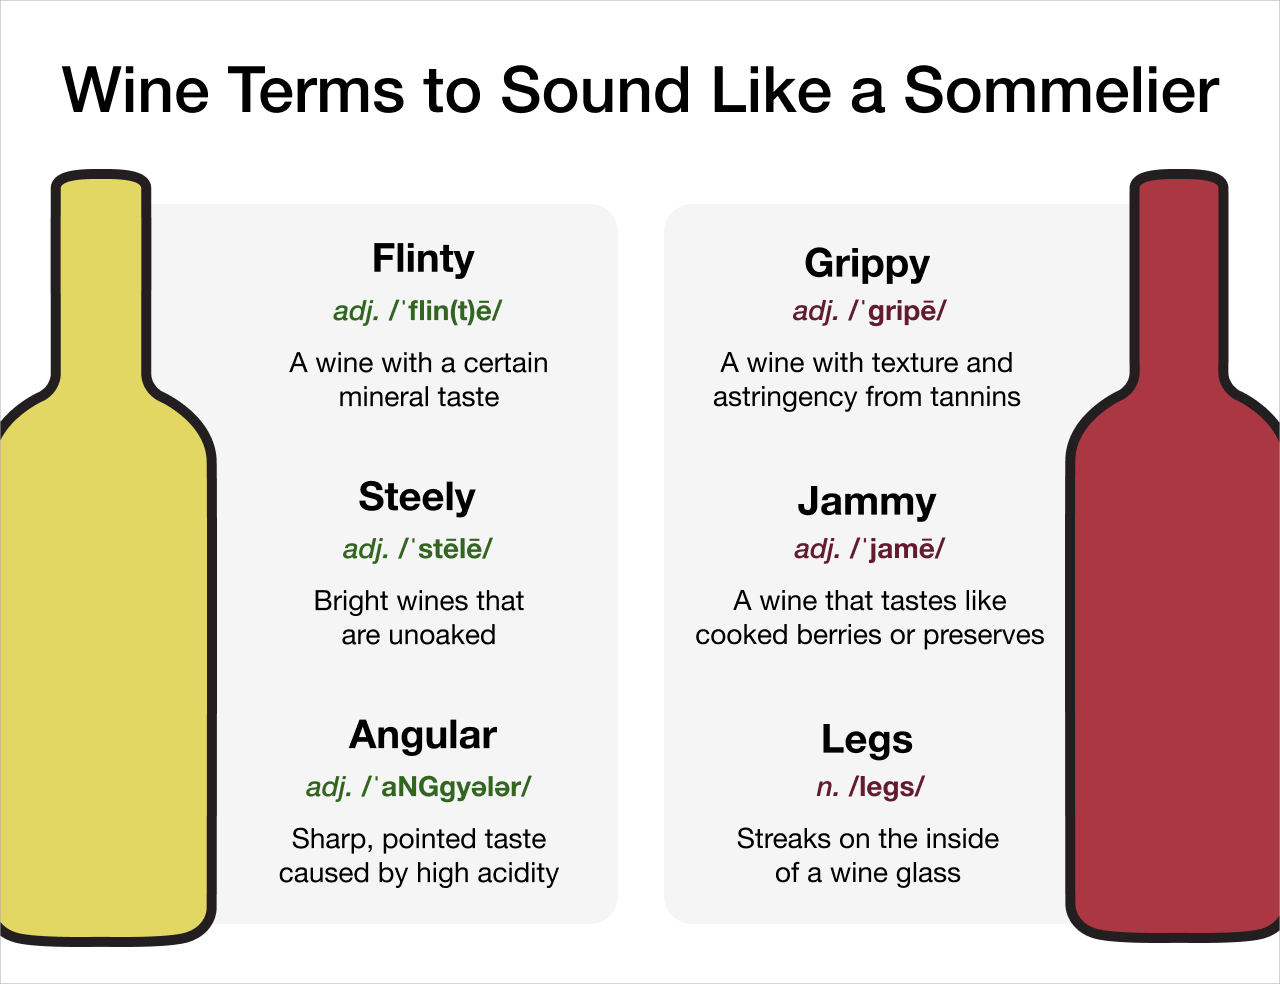 Wine Terms to Sound Like a Sommelier Infographic | Macy's Wine Shop